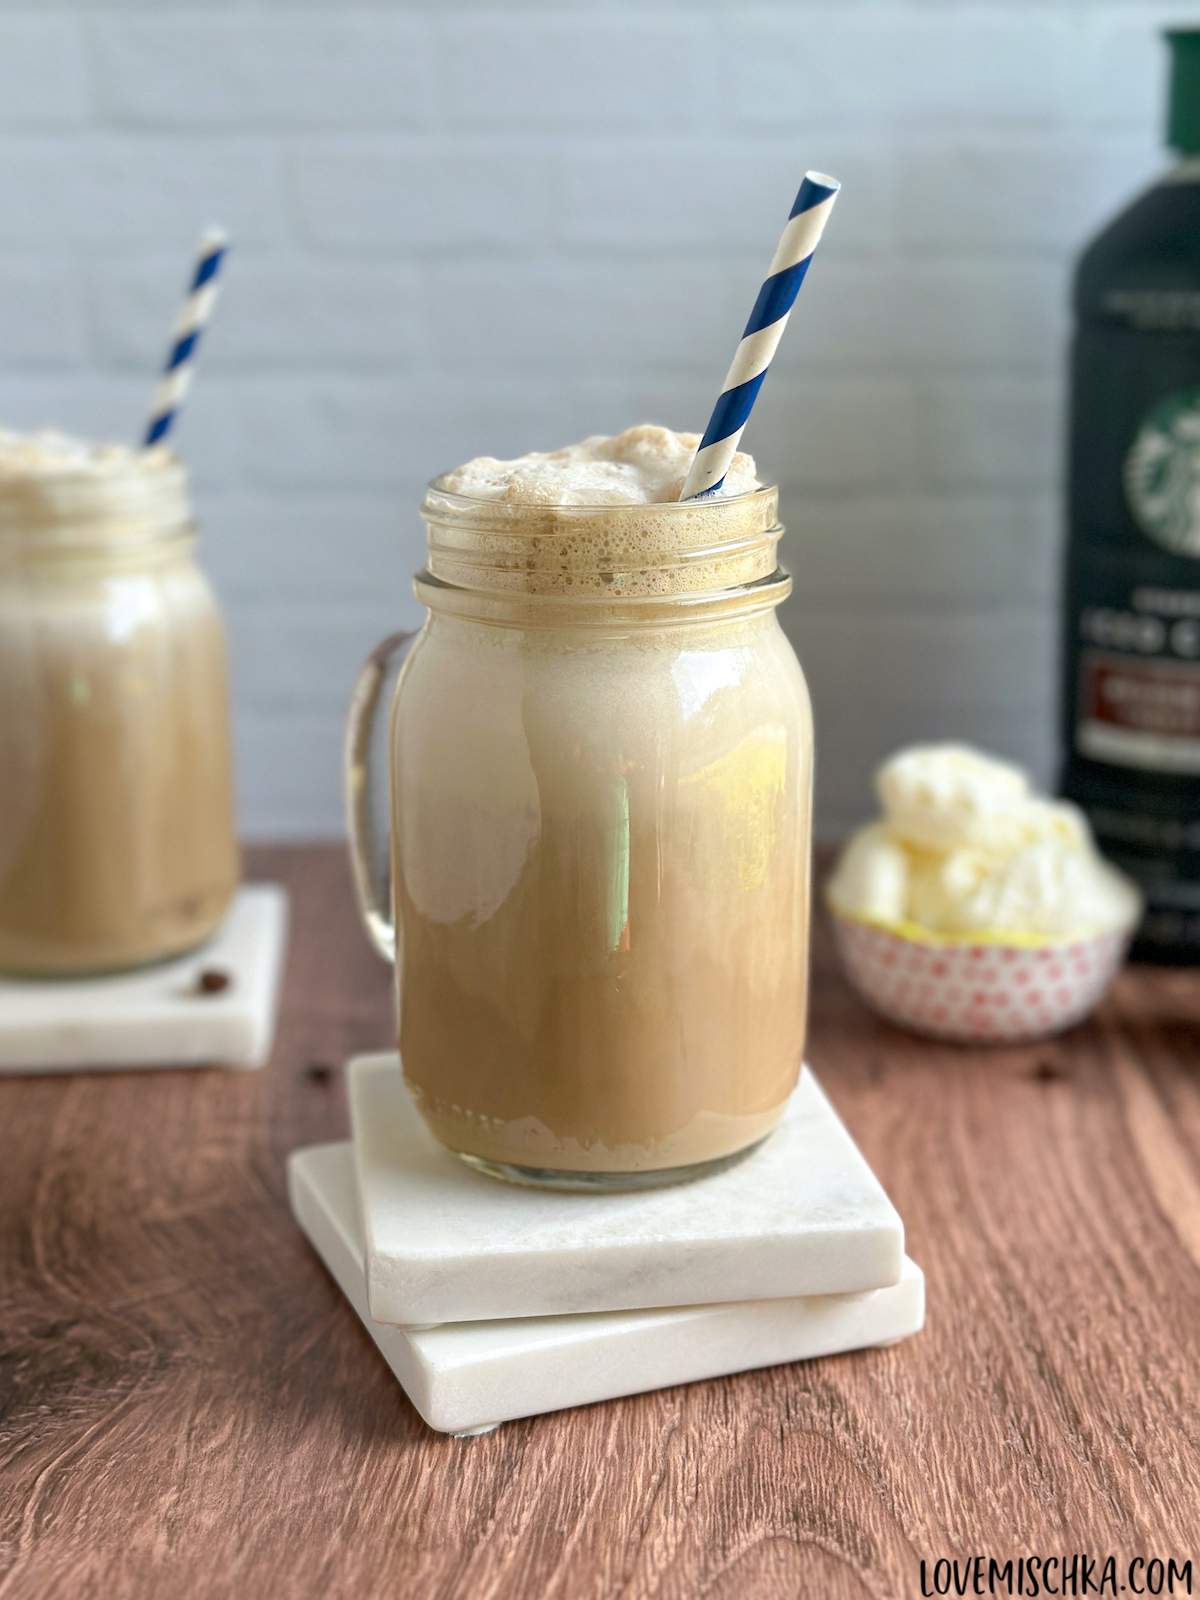 A cold, creamy iced coffee with ice cream in front of the three ingredients in this iced coffee recipe with ice cream - iced coffee, milk, and ice cream.